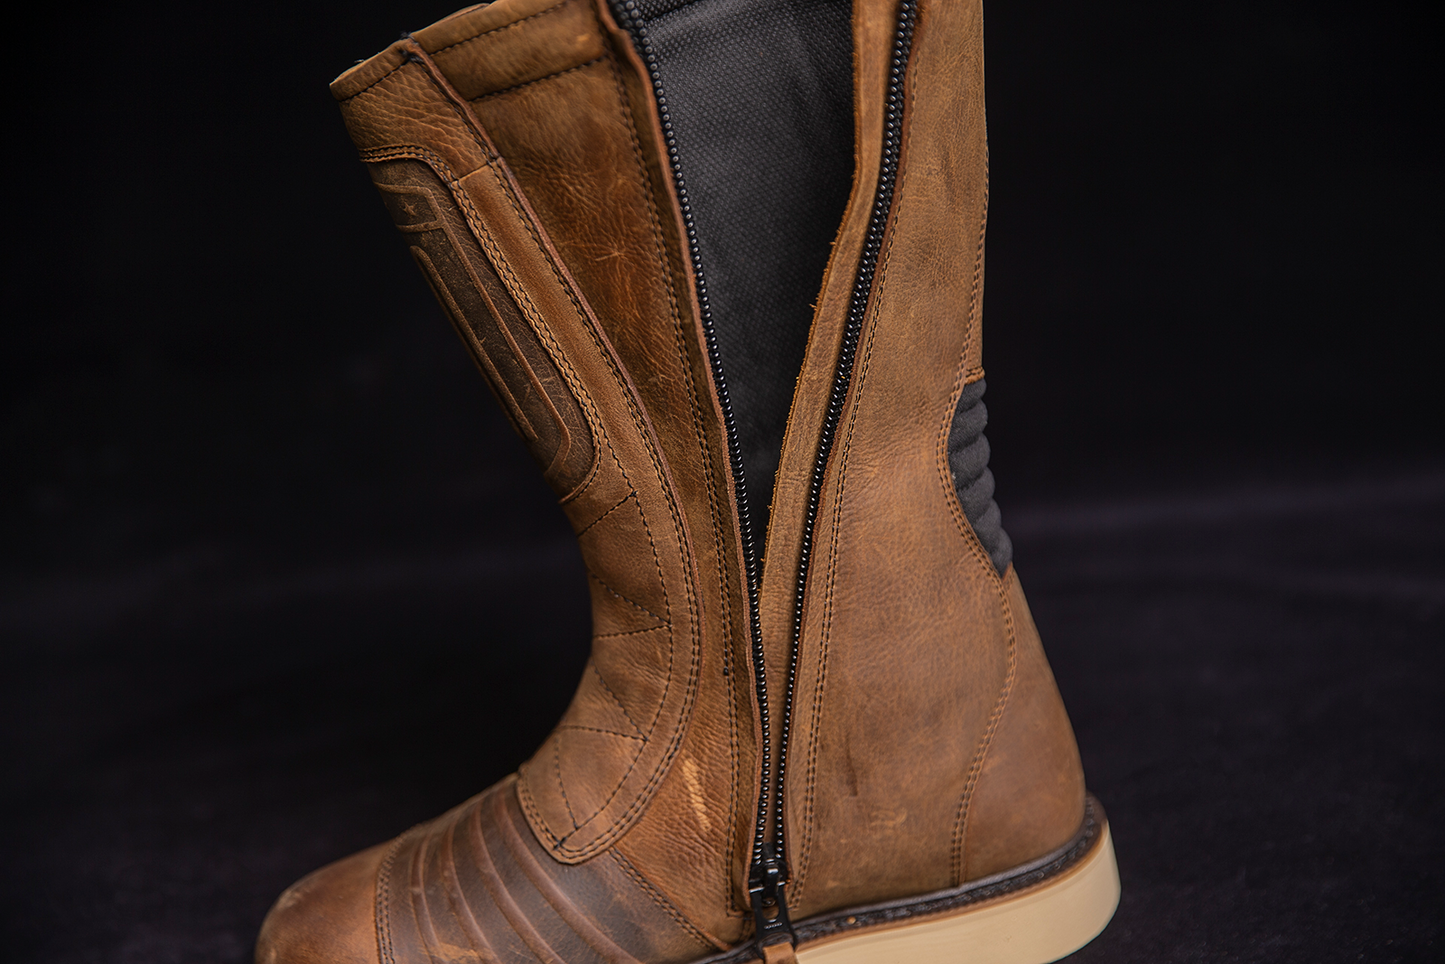 ICON Elsinore 2™ CE Boots - Brown - Size 12 3403-1229